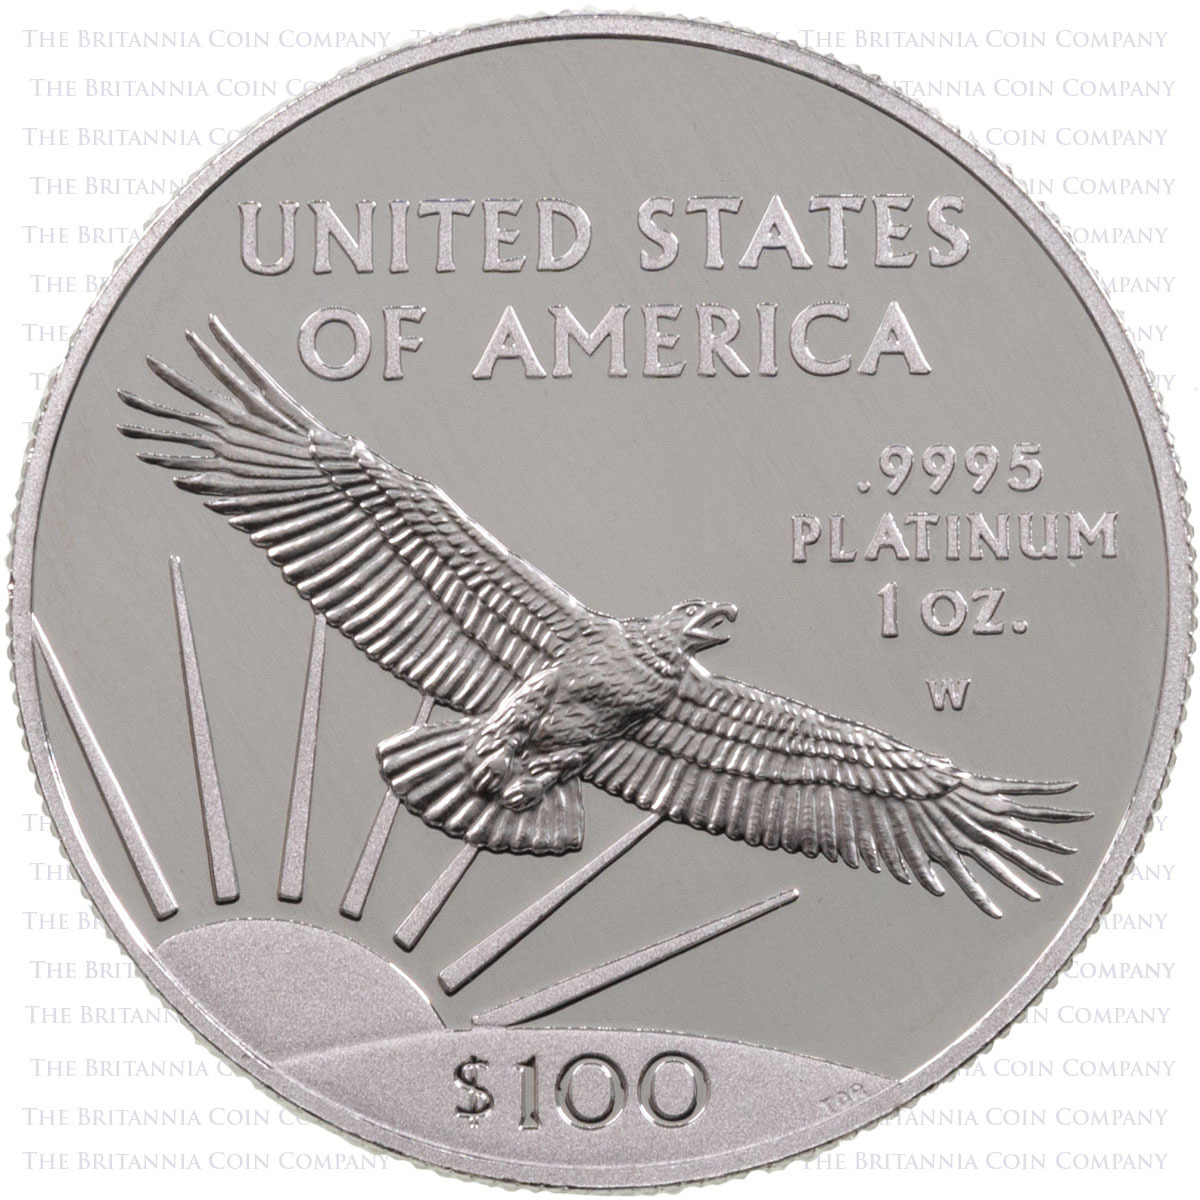 17EJ 2017 United States American Eagle One Ounce Platinum Proof Coin Reverse